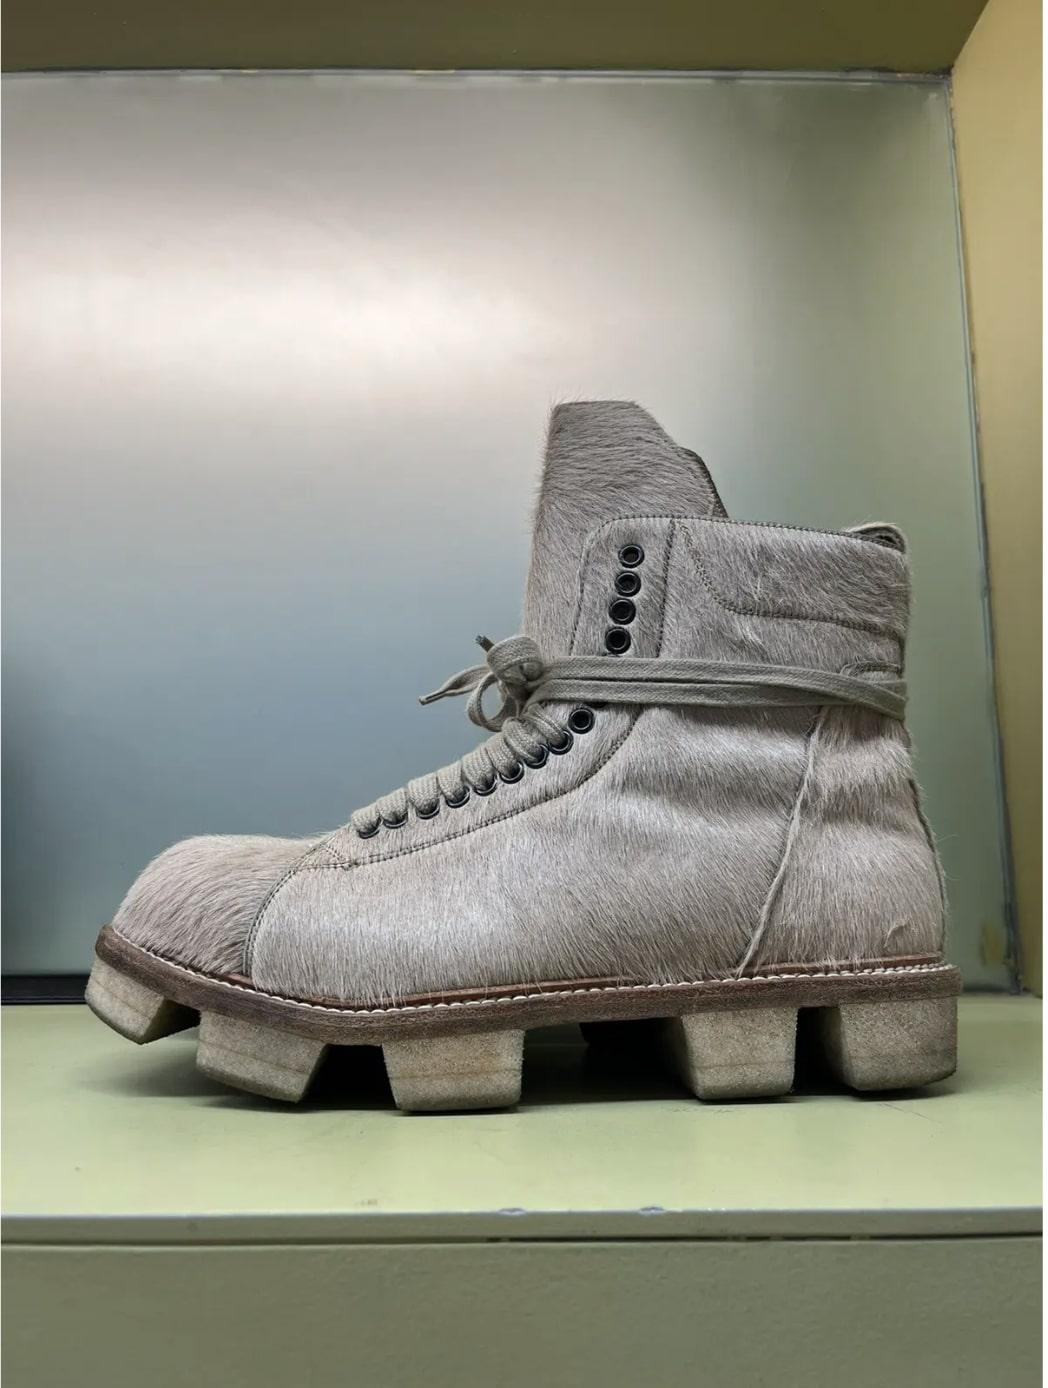 Rick Owens
FW13 Plinth Pony Hair Boots
Size US 11 / EU 44

Beautiful Rick Owens Plinth pony hair boots in a size US 11. In perfect condition without any flaws. Comes with the original box and jumbo tote bag. Absolutely stunning pieces, fit true to